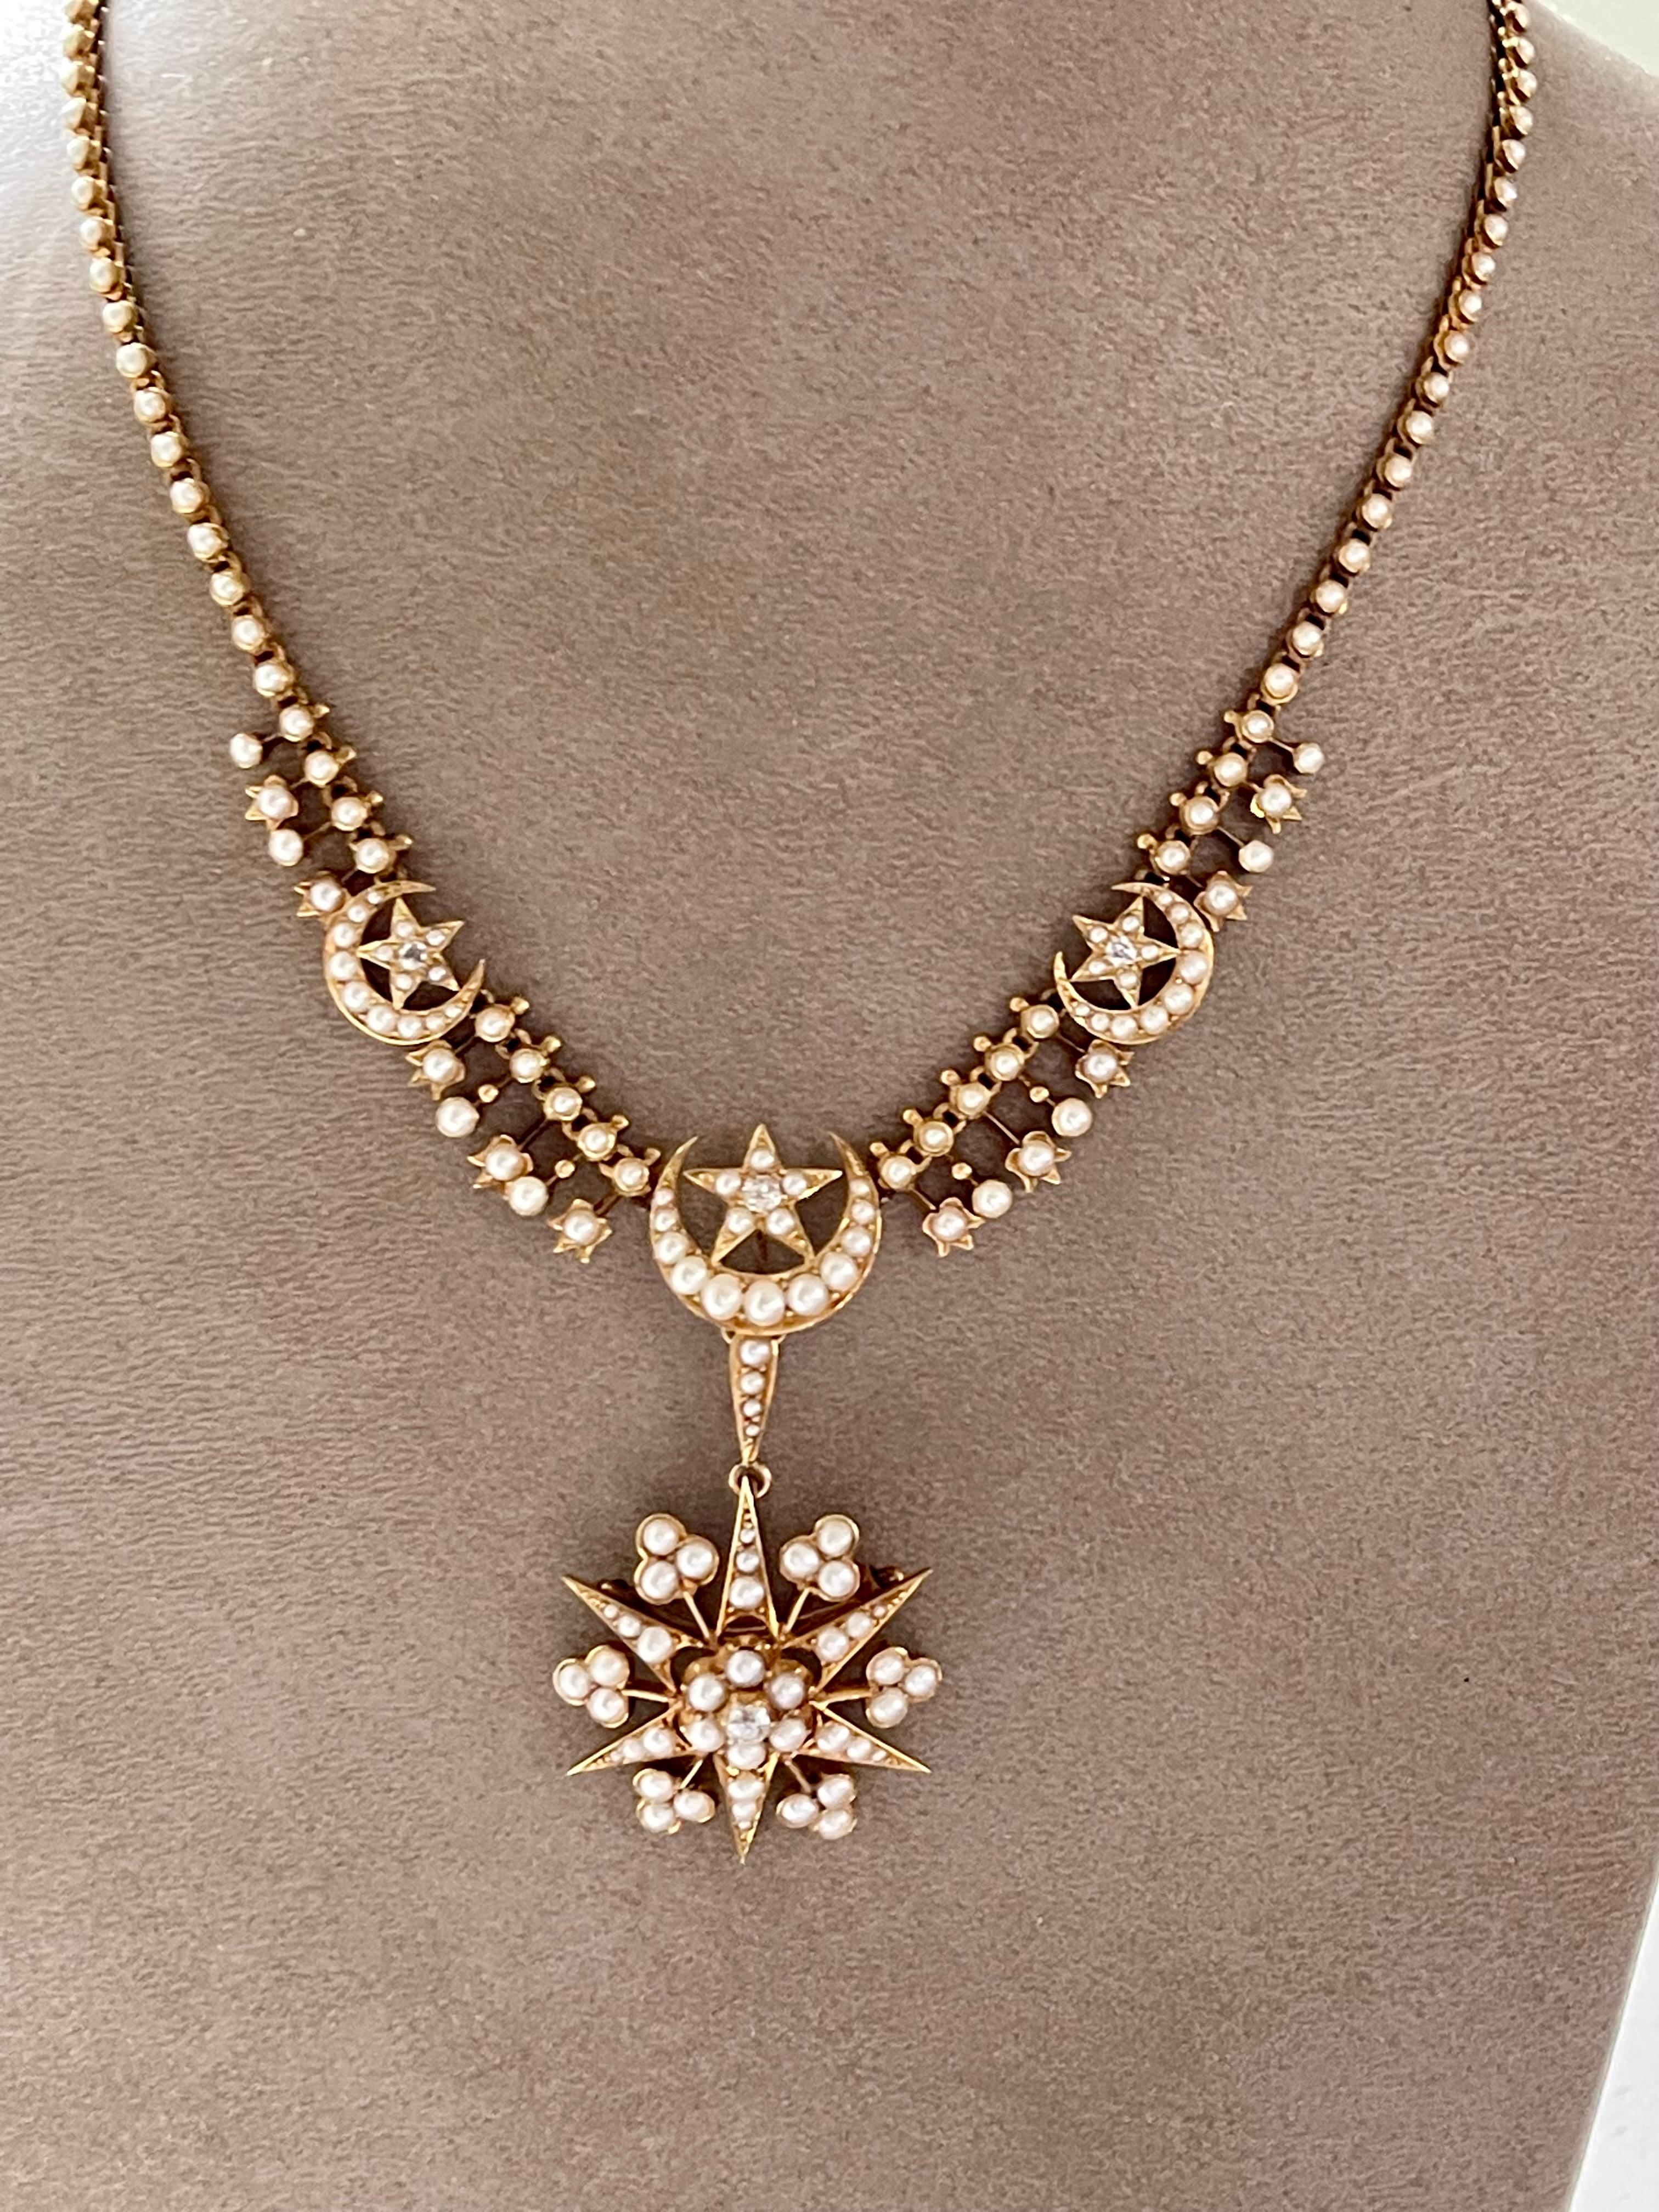 18 K Yellow Gold Victorian Star Necklace Pendant/Brooch Pearls Diamonds For Sale 5